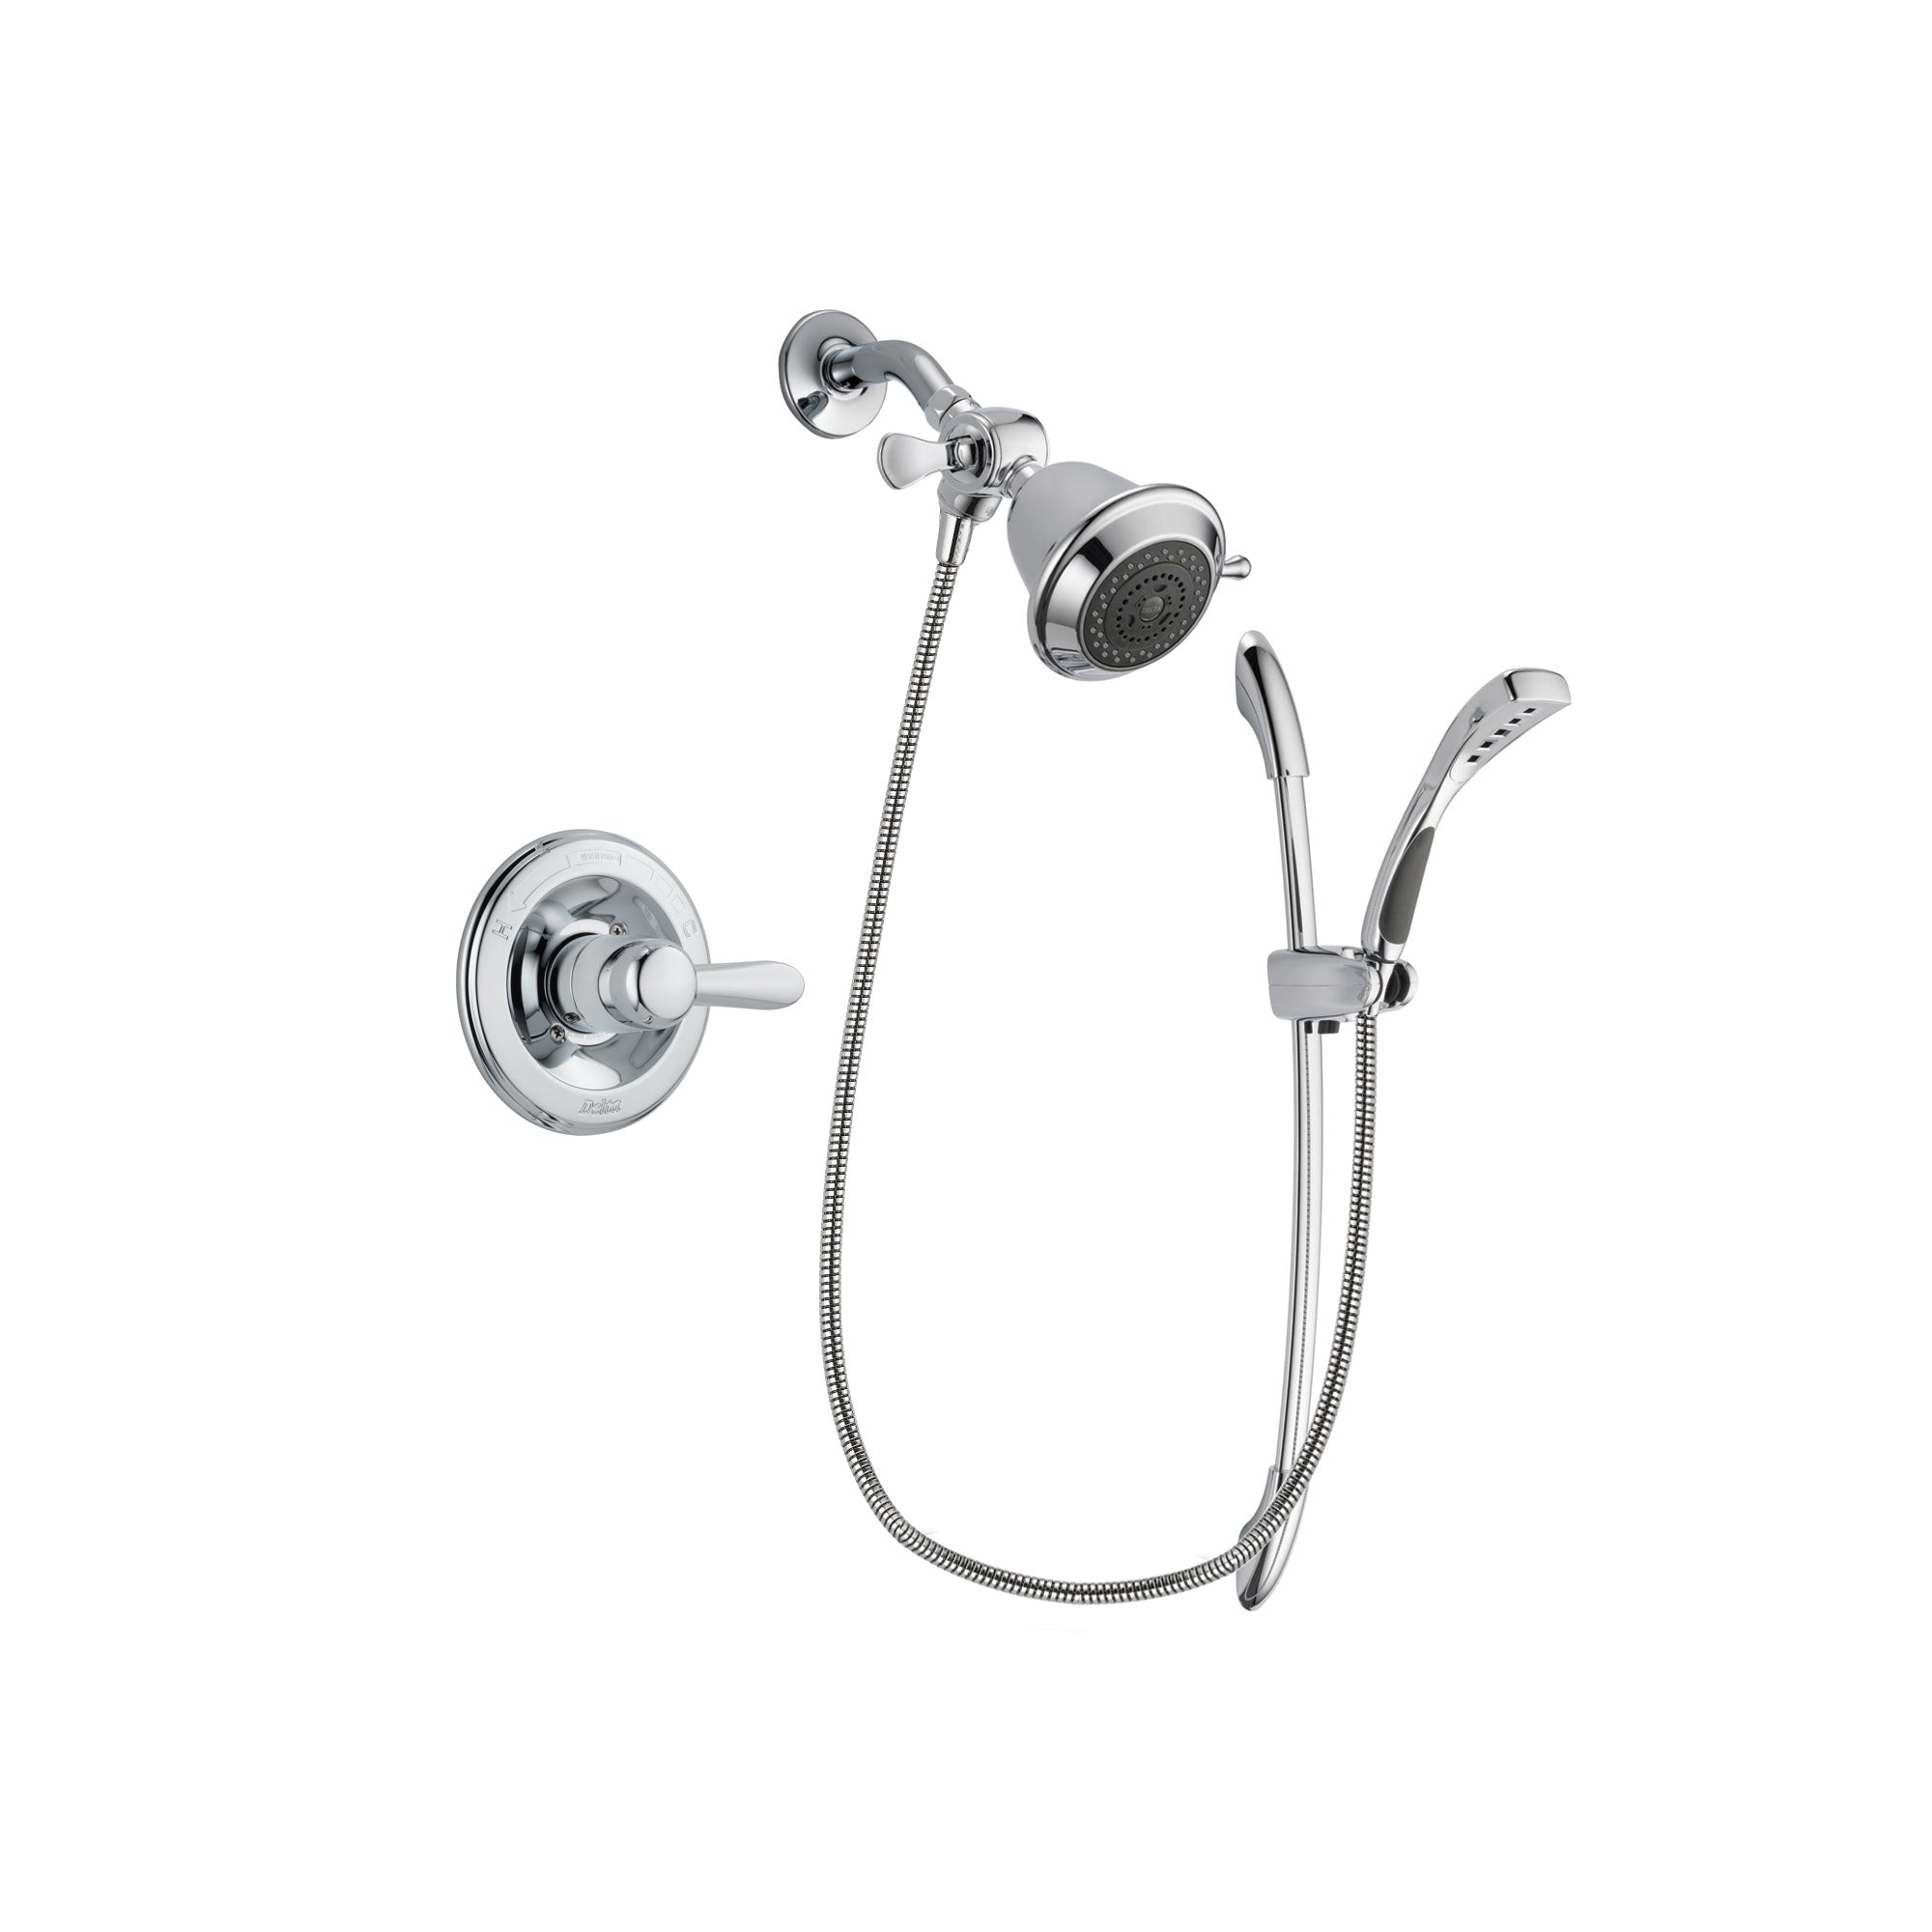 Delta Lahara Chrome Finish Shower Faucet System Package with Shower Head and Handheld Shower with Slide Bar Includes Rough-in Valve DSP0436V